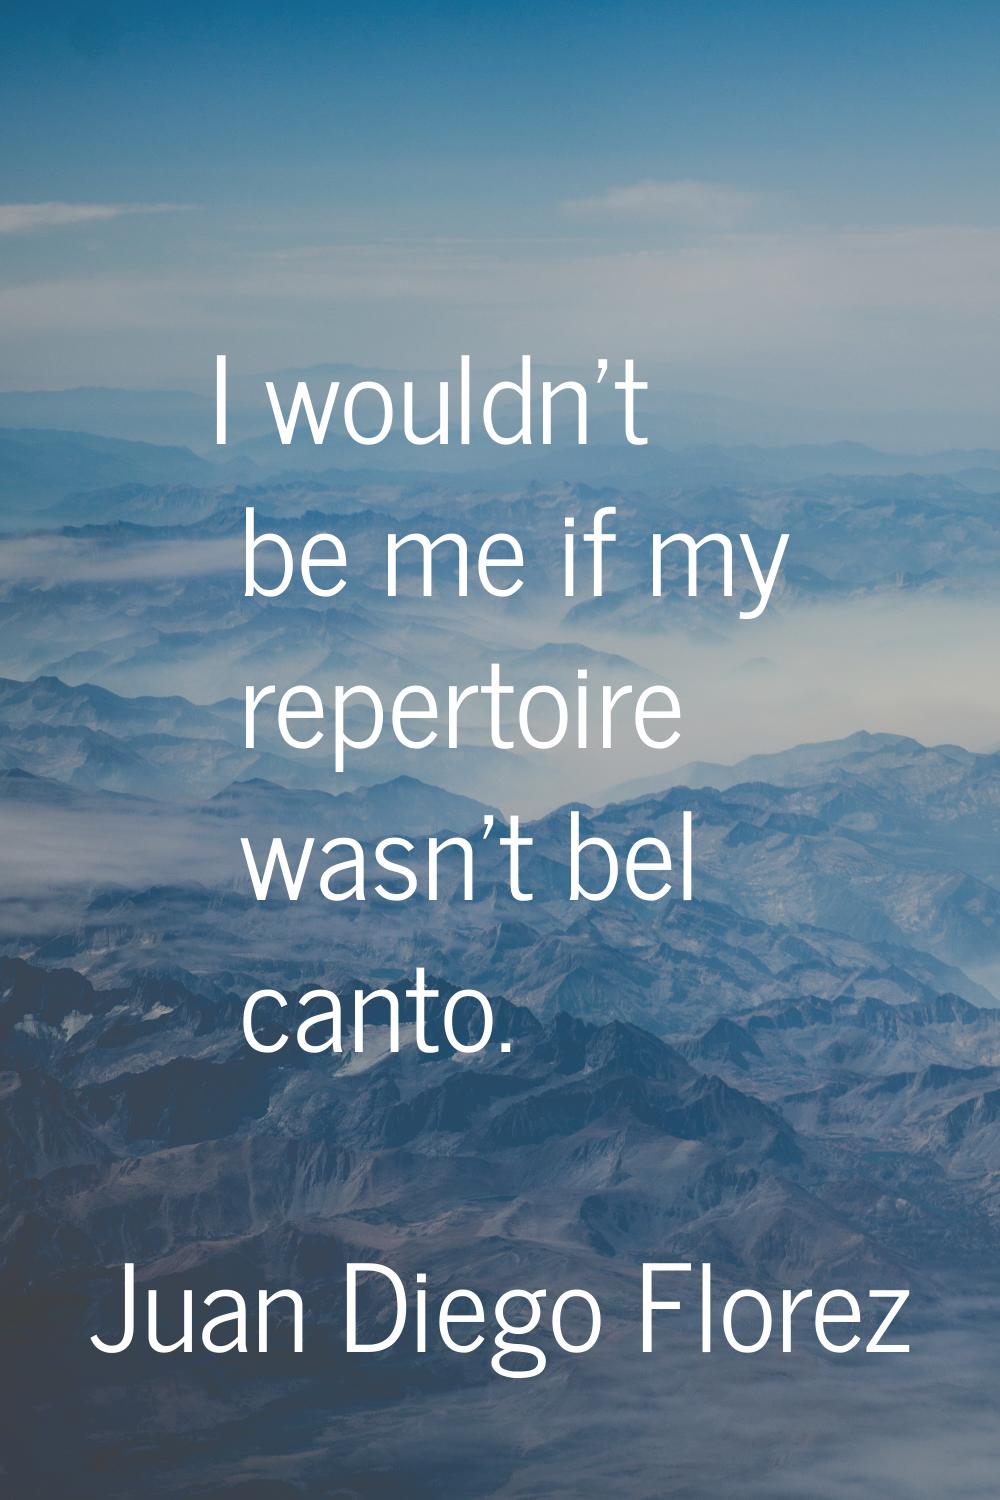 I wouldn't be me if my repertoire wasn't bel canto.